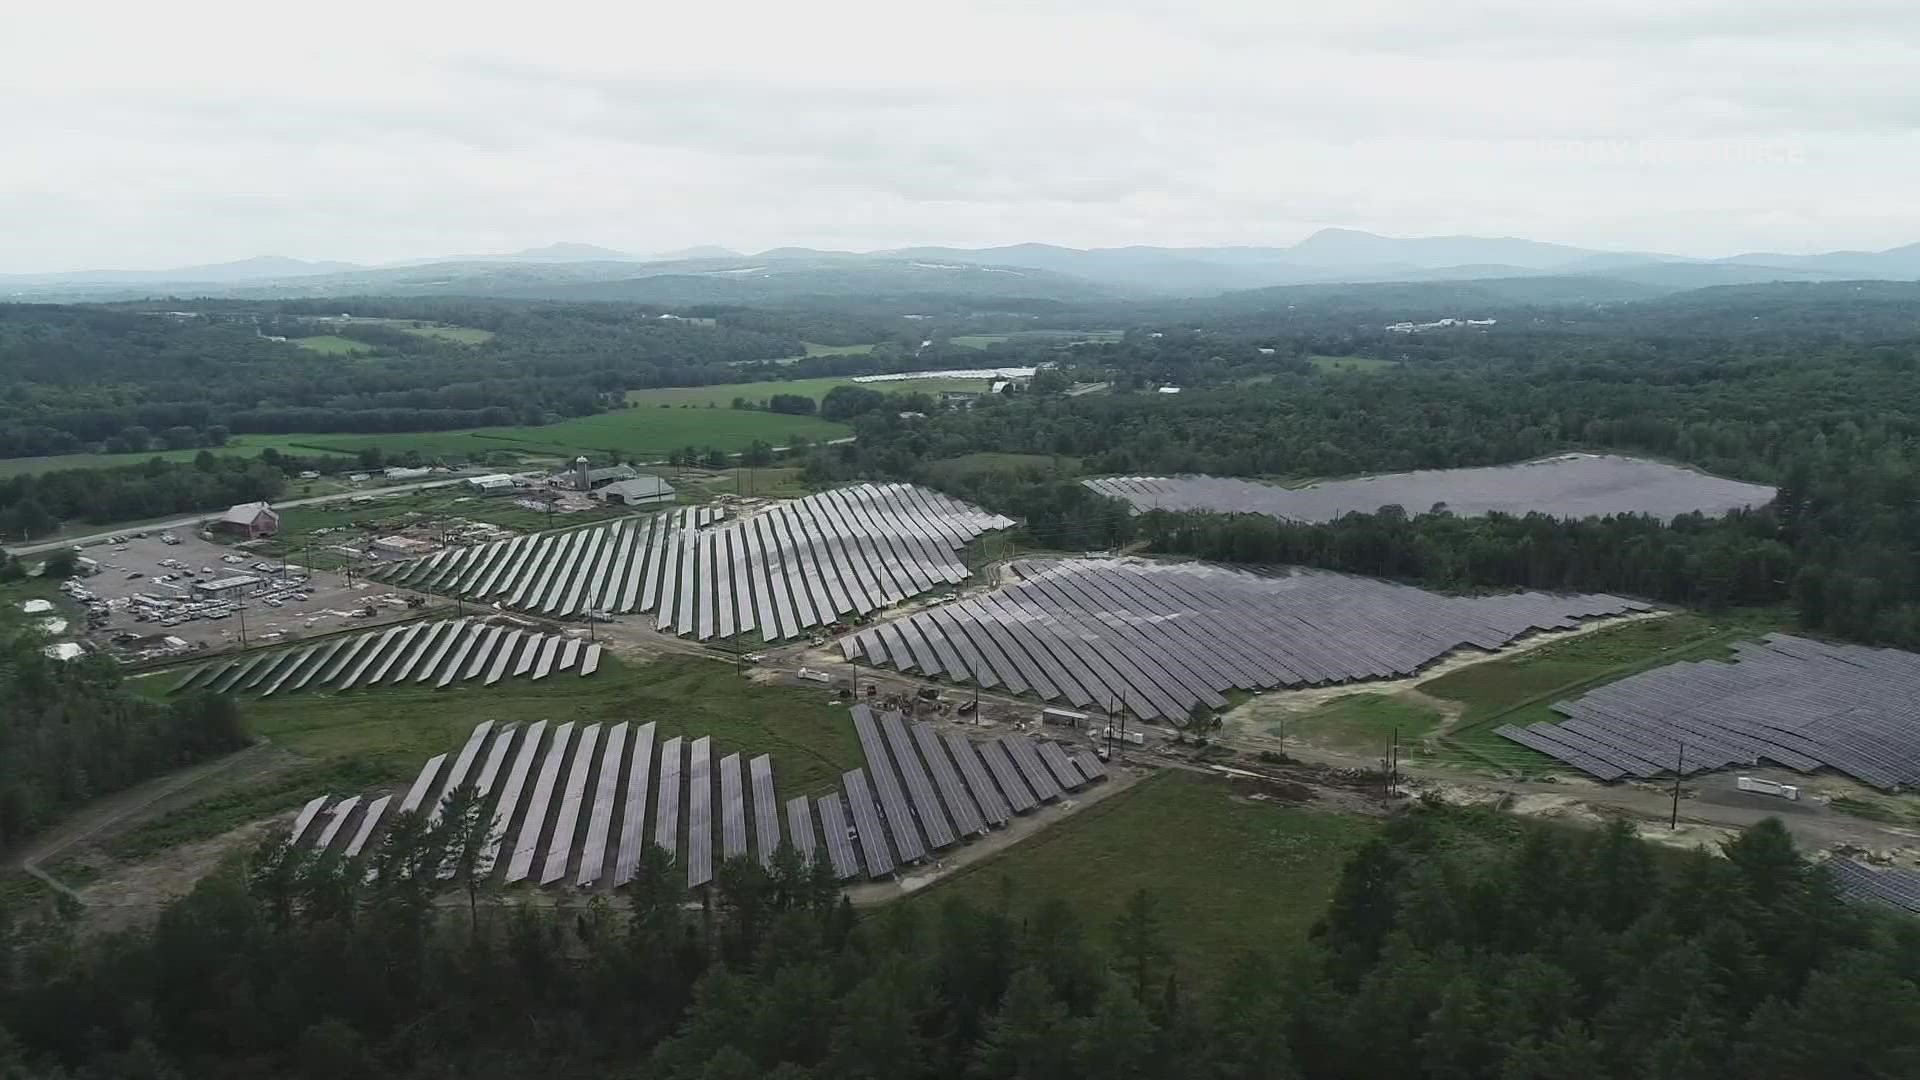 The proposal could provide incentives to build solar farms on land contaminated by PFAS.